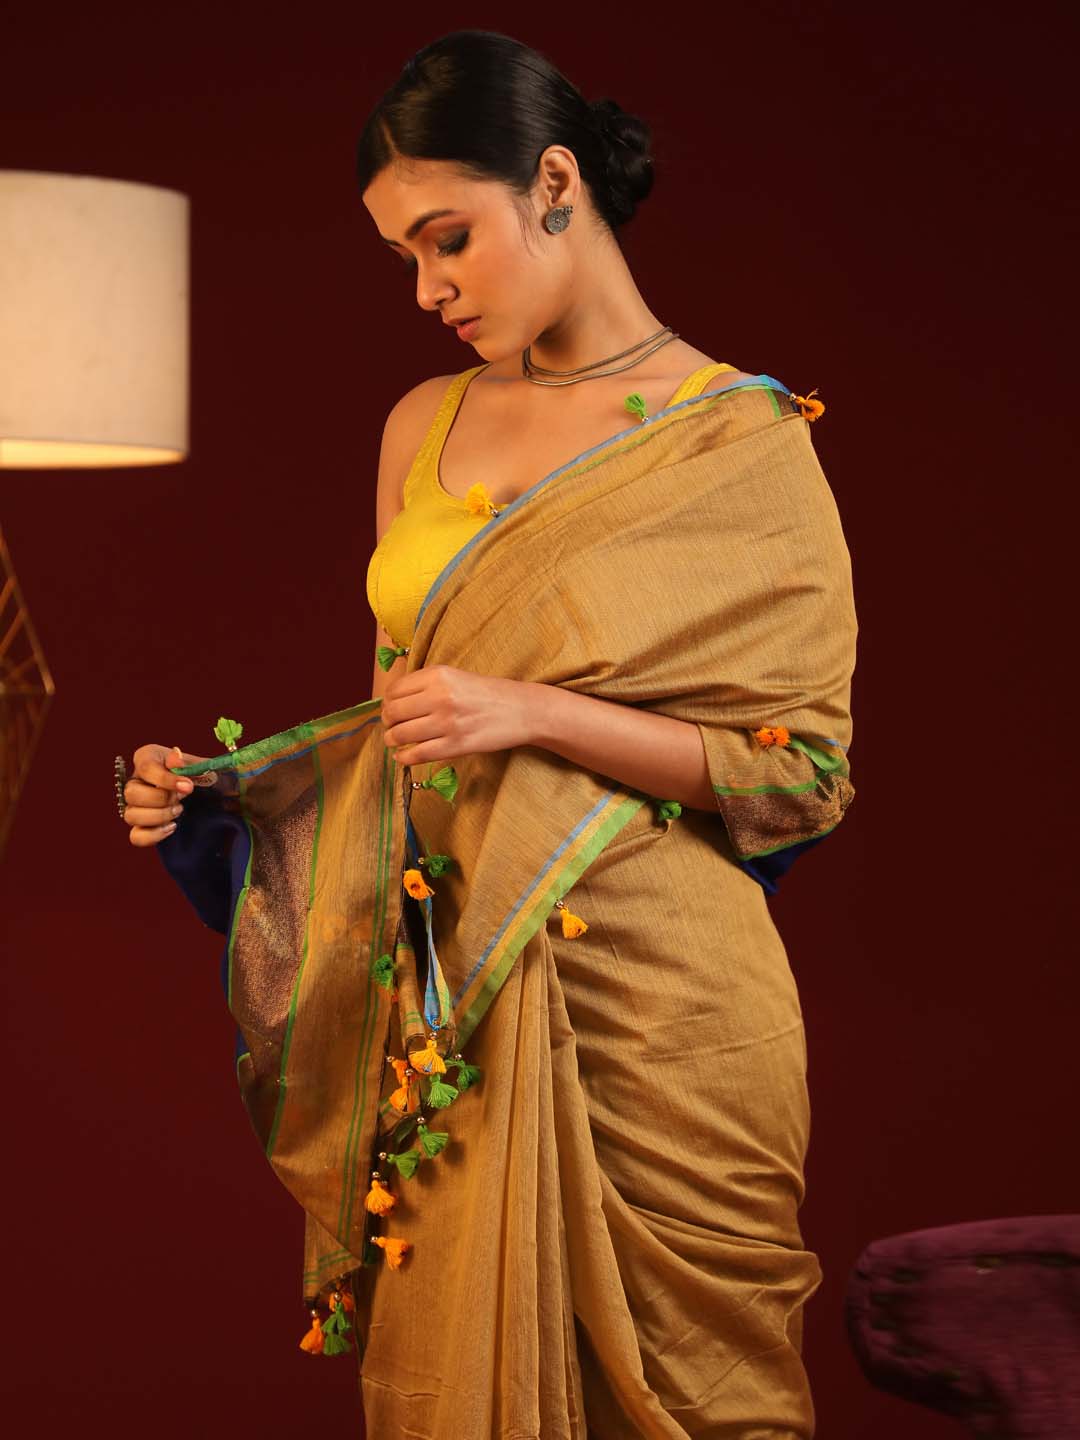 Indethnic Olive and Black Solid Colour Blocked Saree with Tassles - View 1